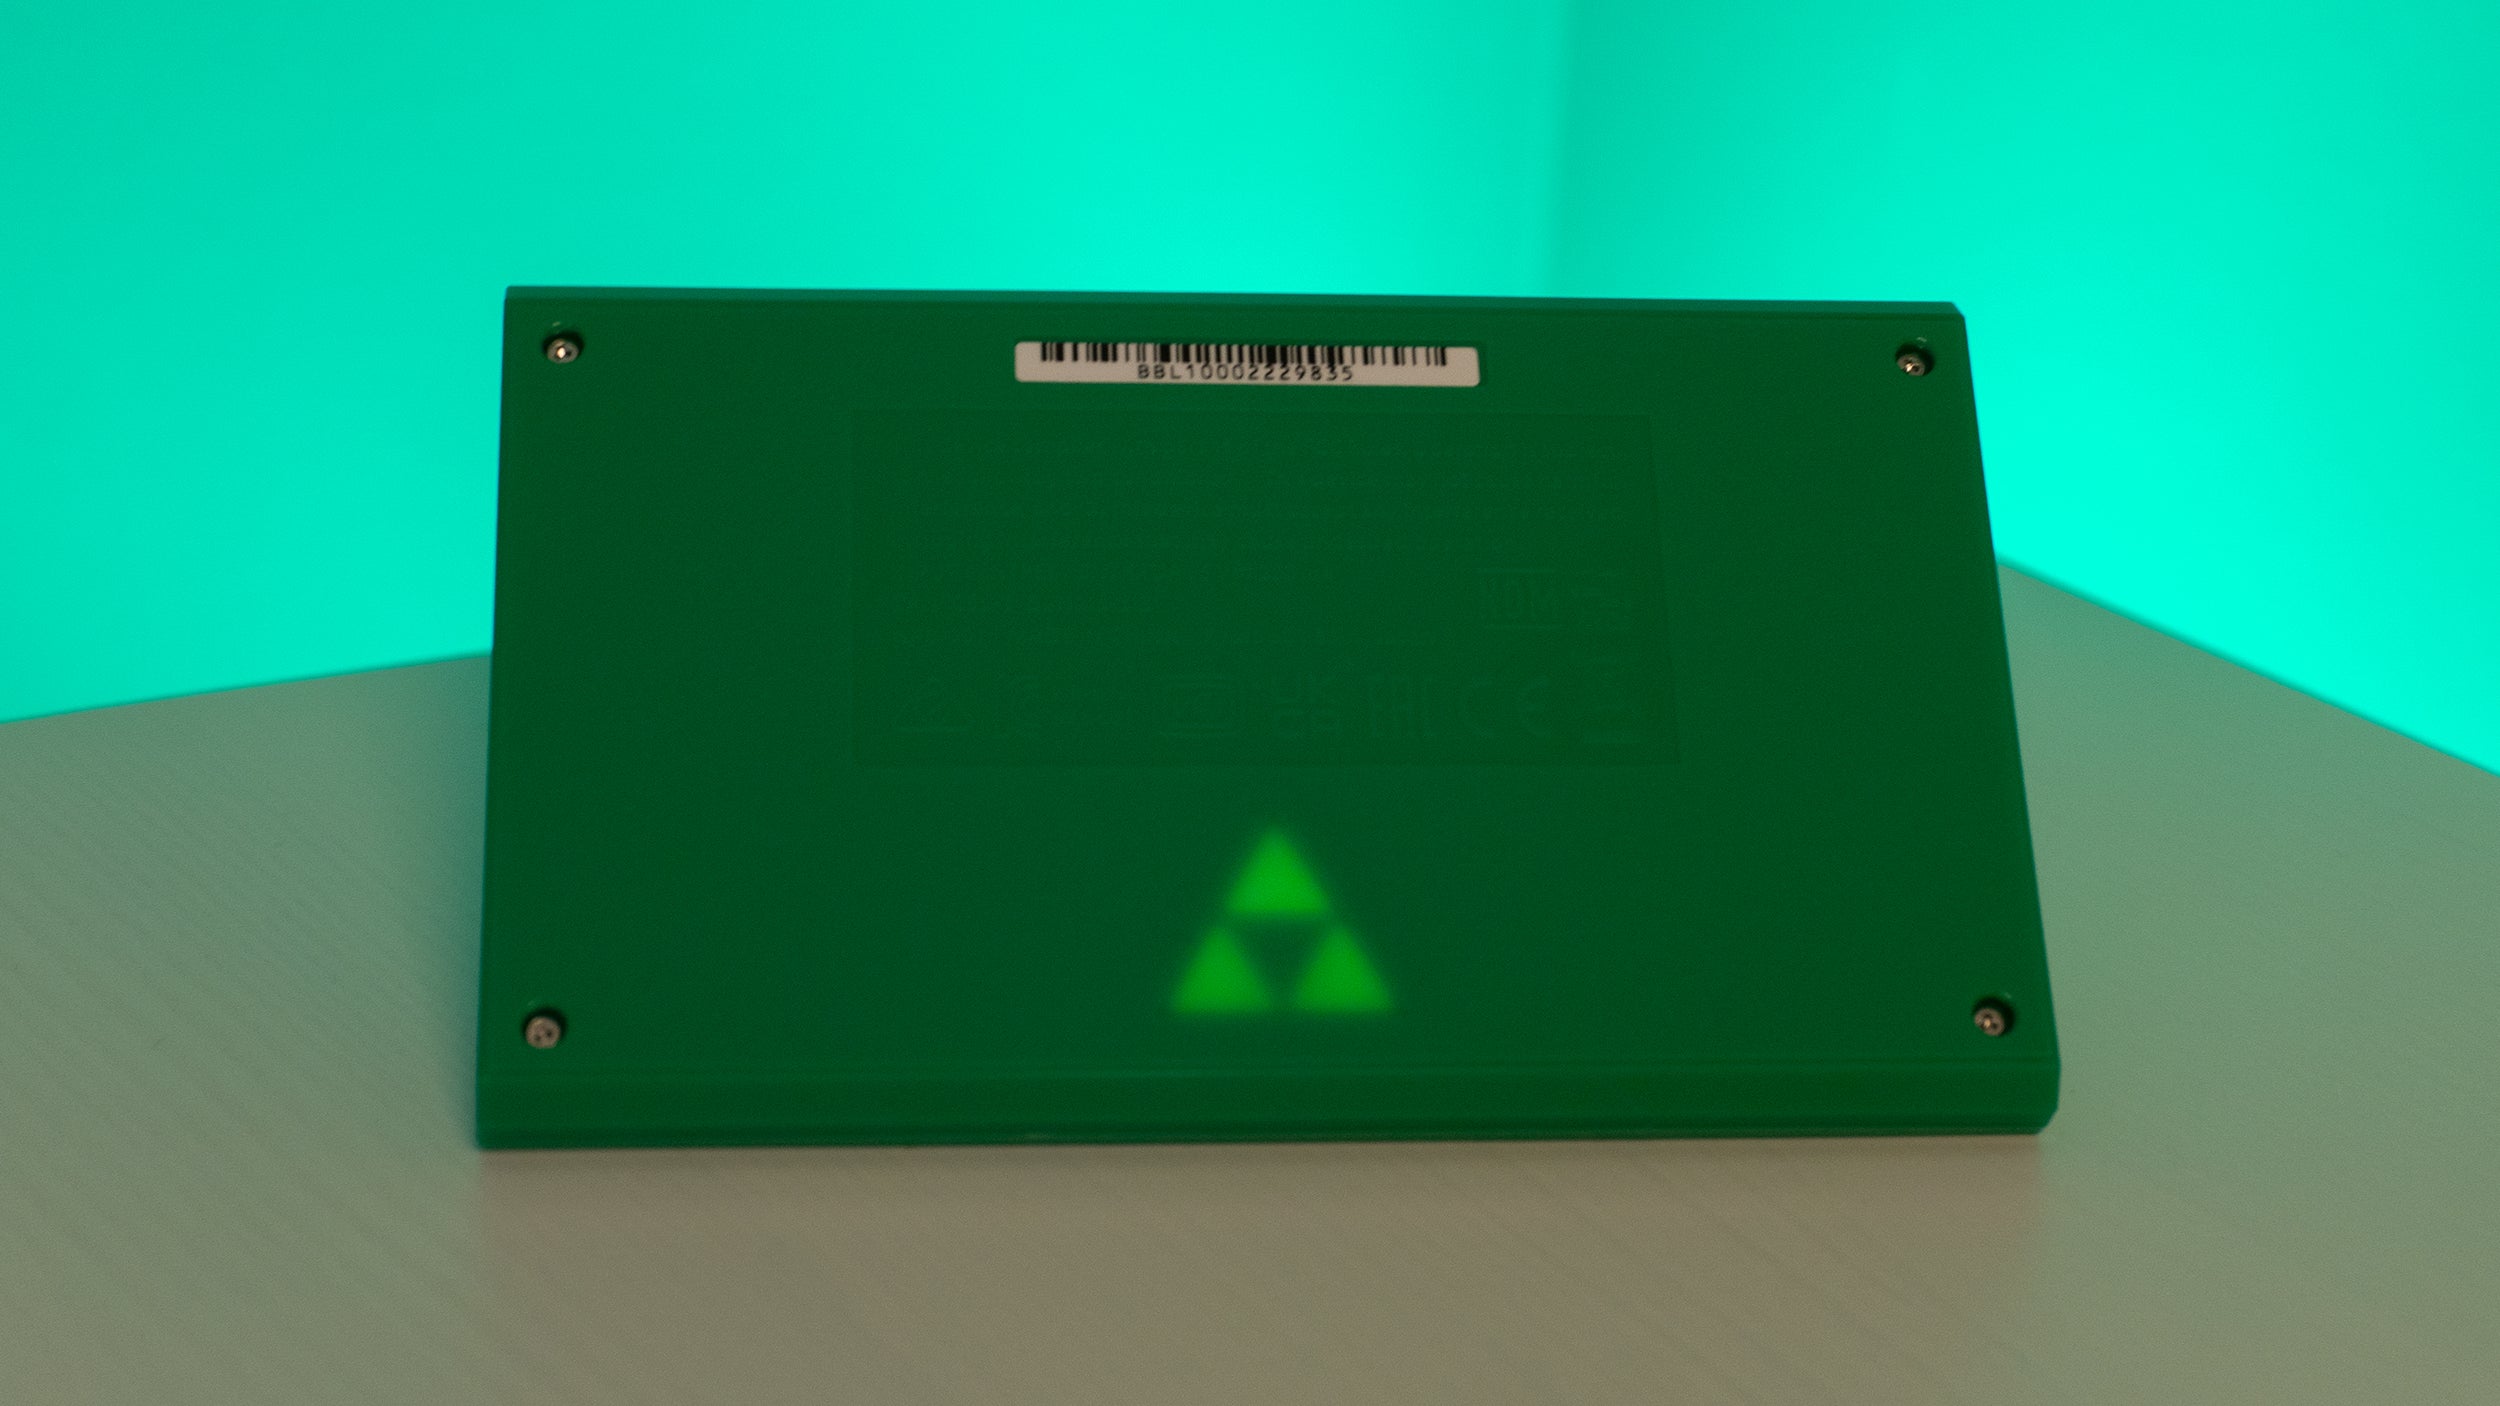 Flip the handheld over and you'll find a subtle glowing Triforce design on the back. (Photo: Andrew Liszewski - Gizmodo)